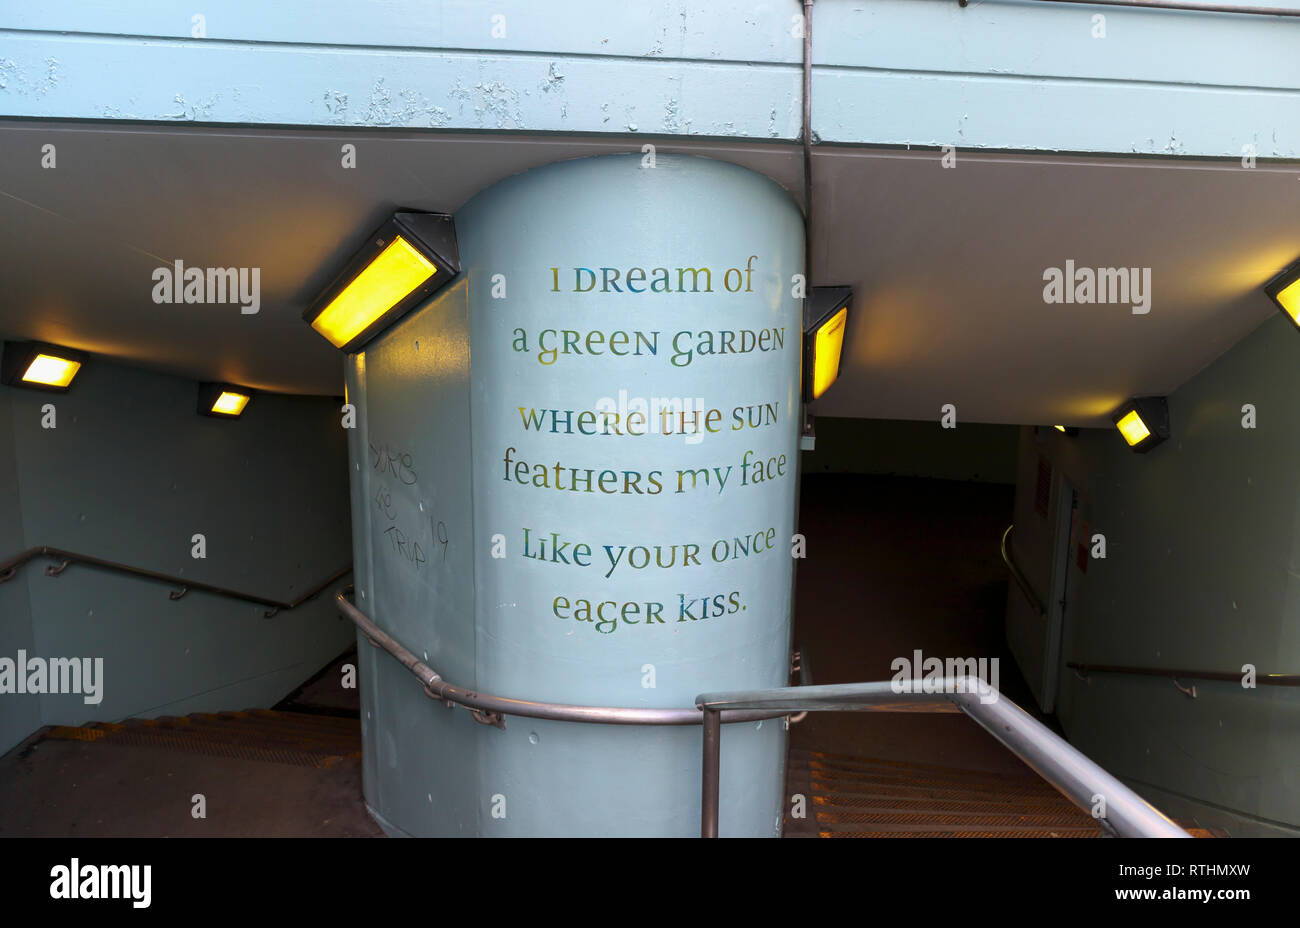 Entrance stairs and stairway to an underpass near London Waterloo Station, Lambeth, London SE1 with words of poetry by Sue Hubbard written on a pillar Stock Photo